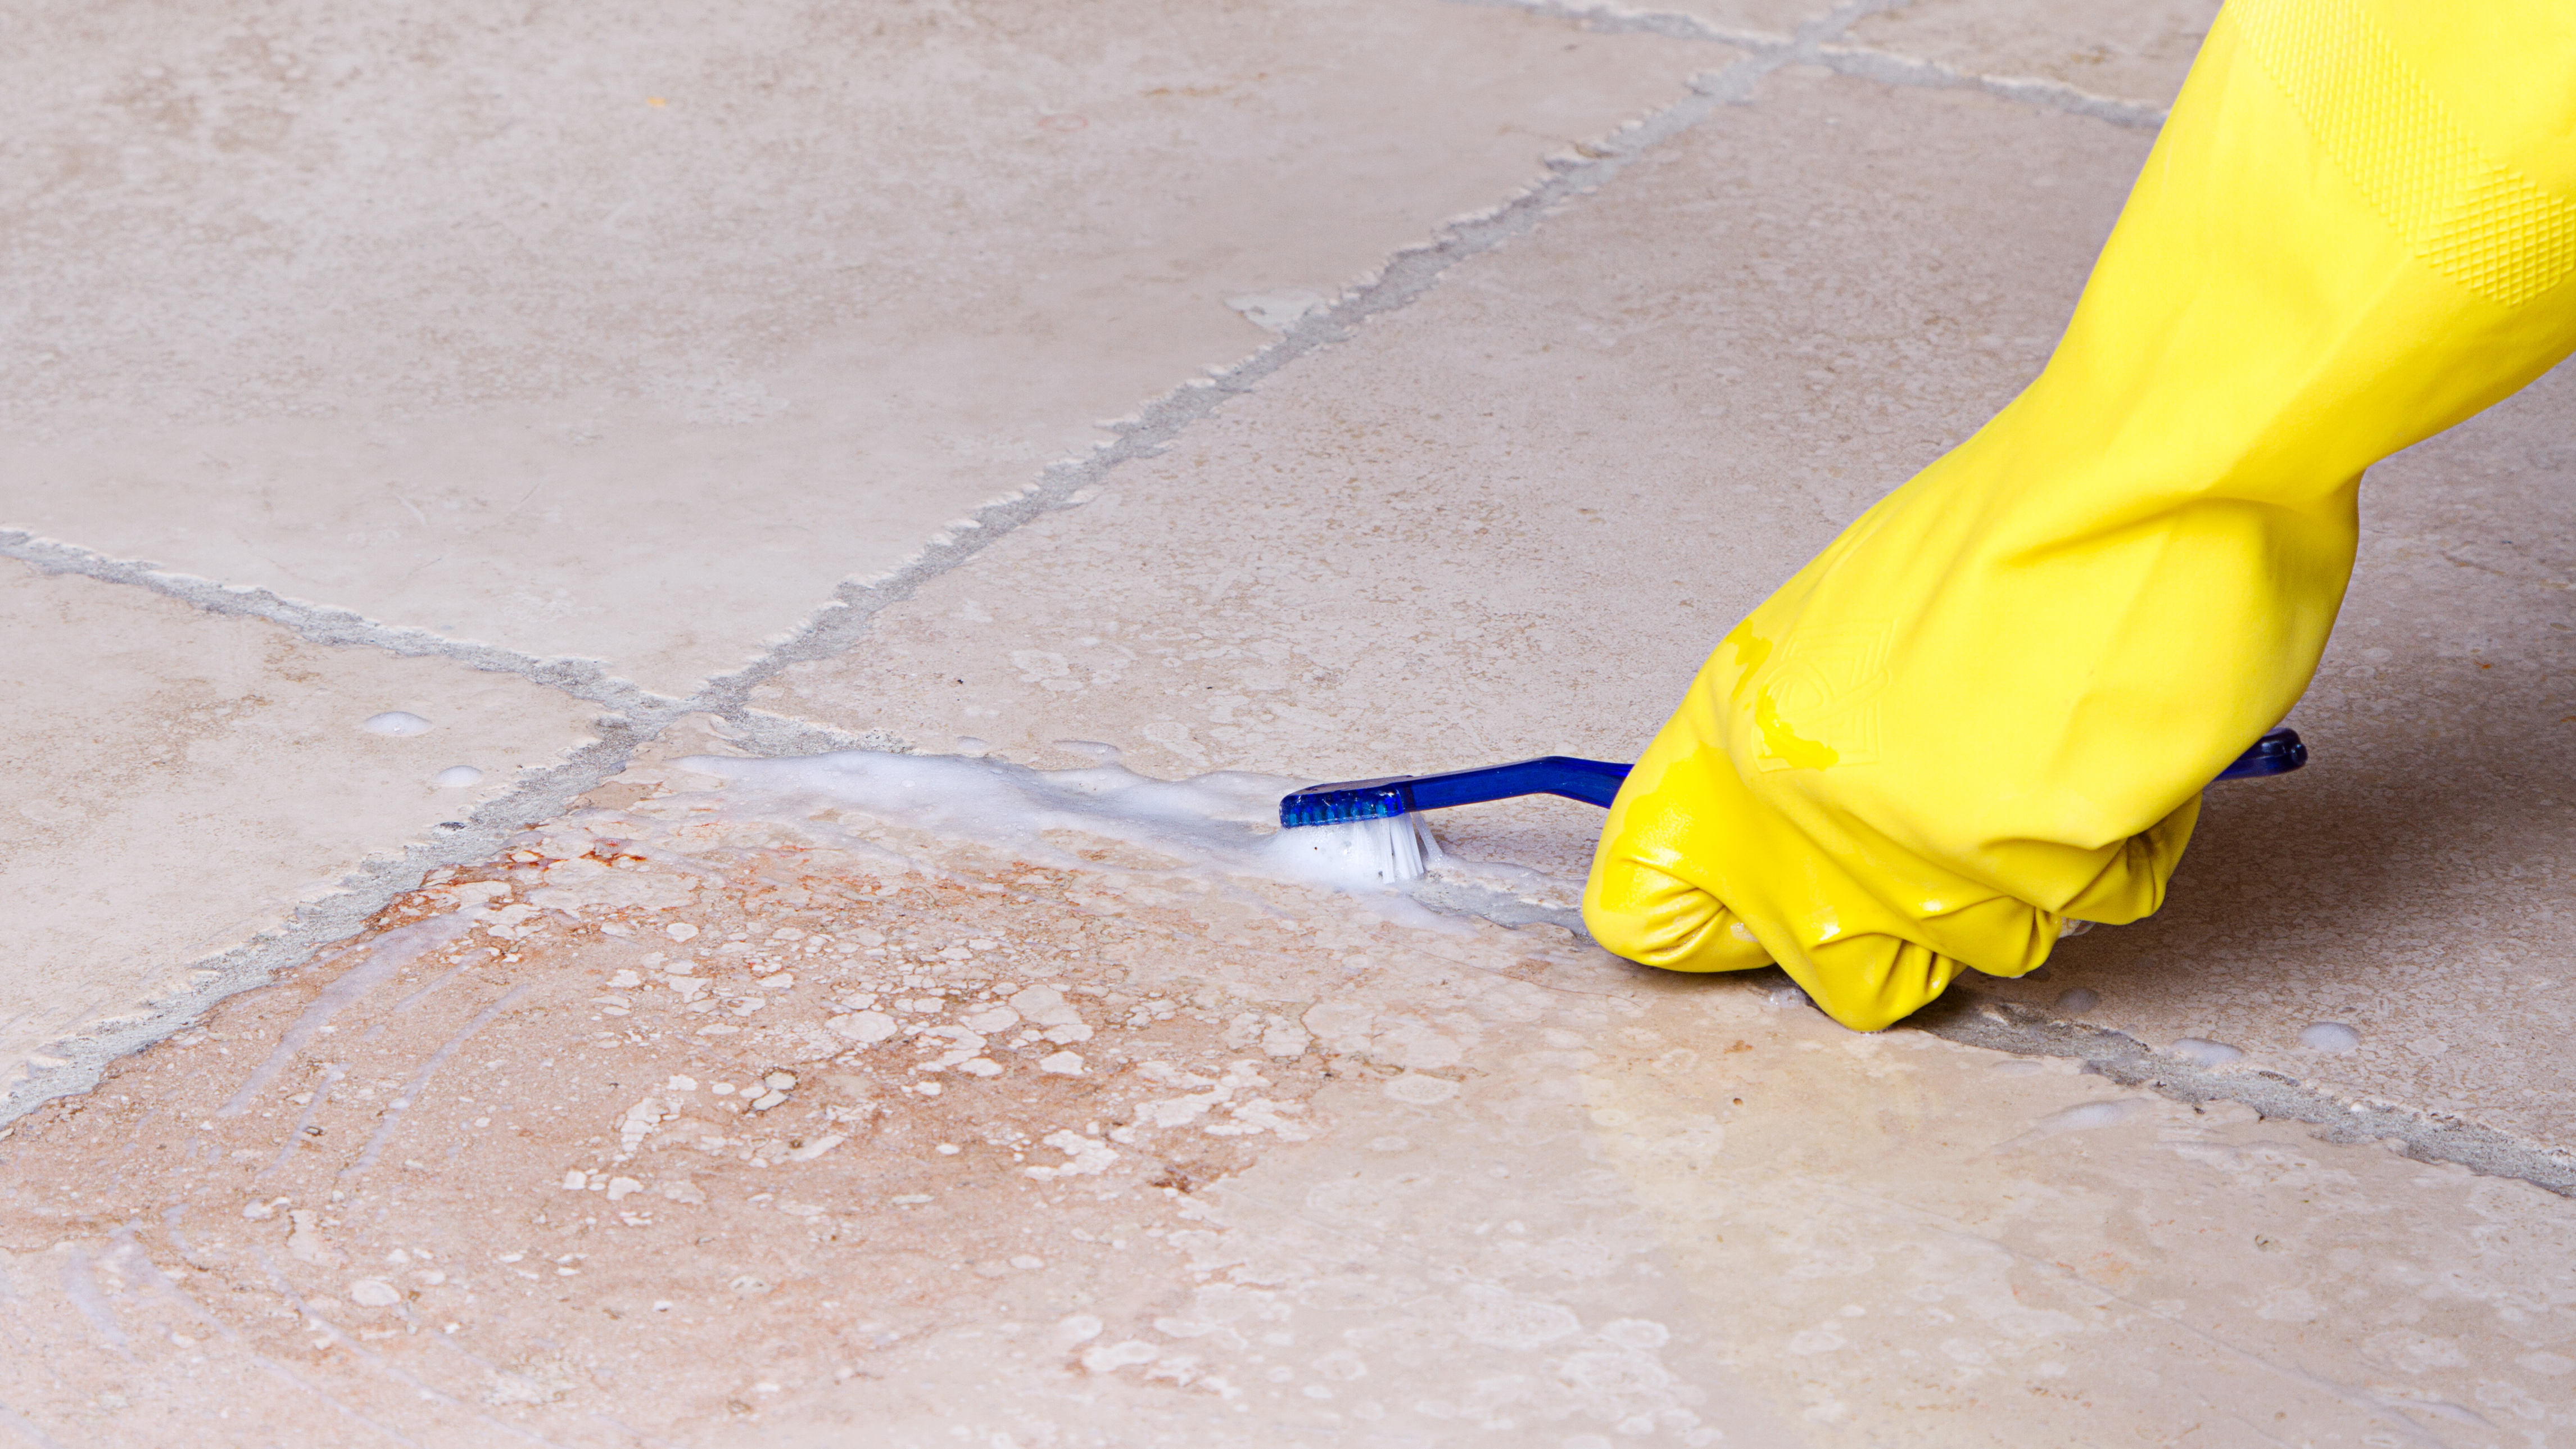 How To Clean Grout On Floor Tiles, Best Way To Remove Old Grout From Floor Tiles